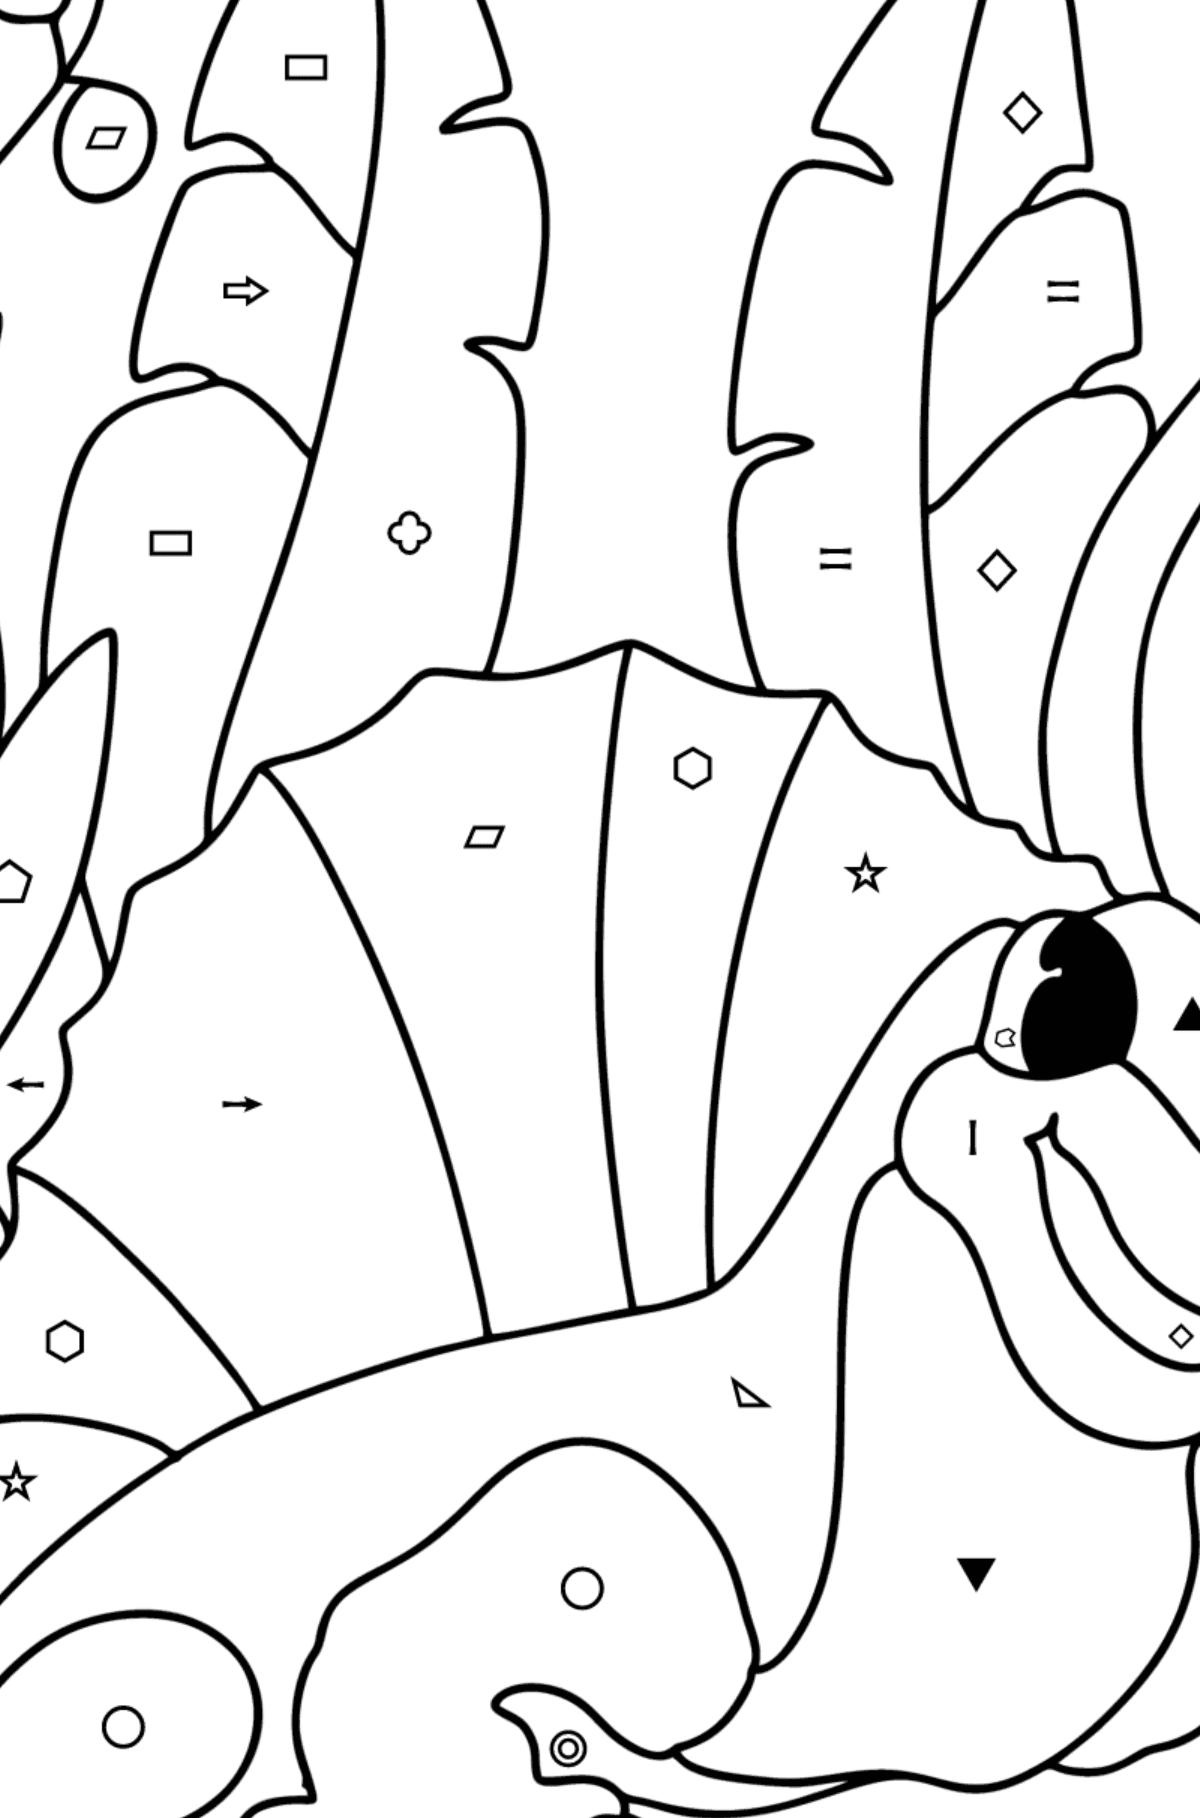 Dimetrodon coloring page - Coloring by Symbols and Geometric Shapes for Kids